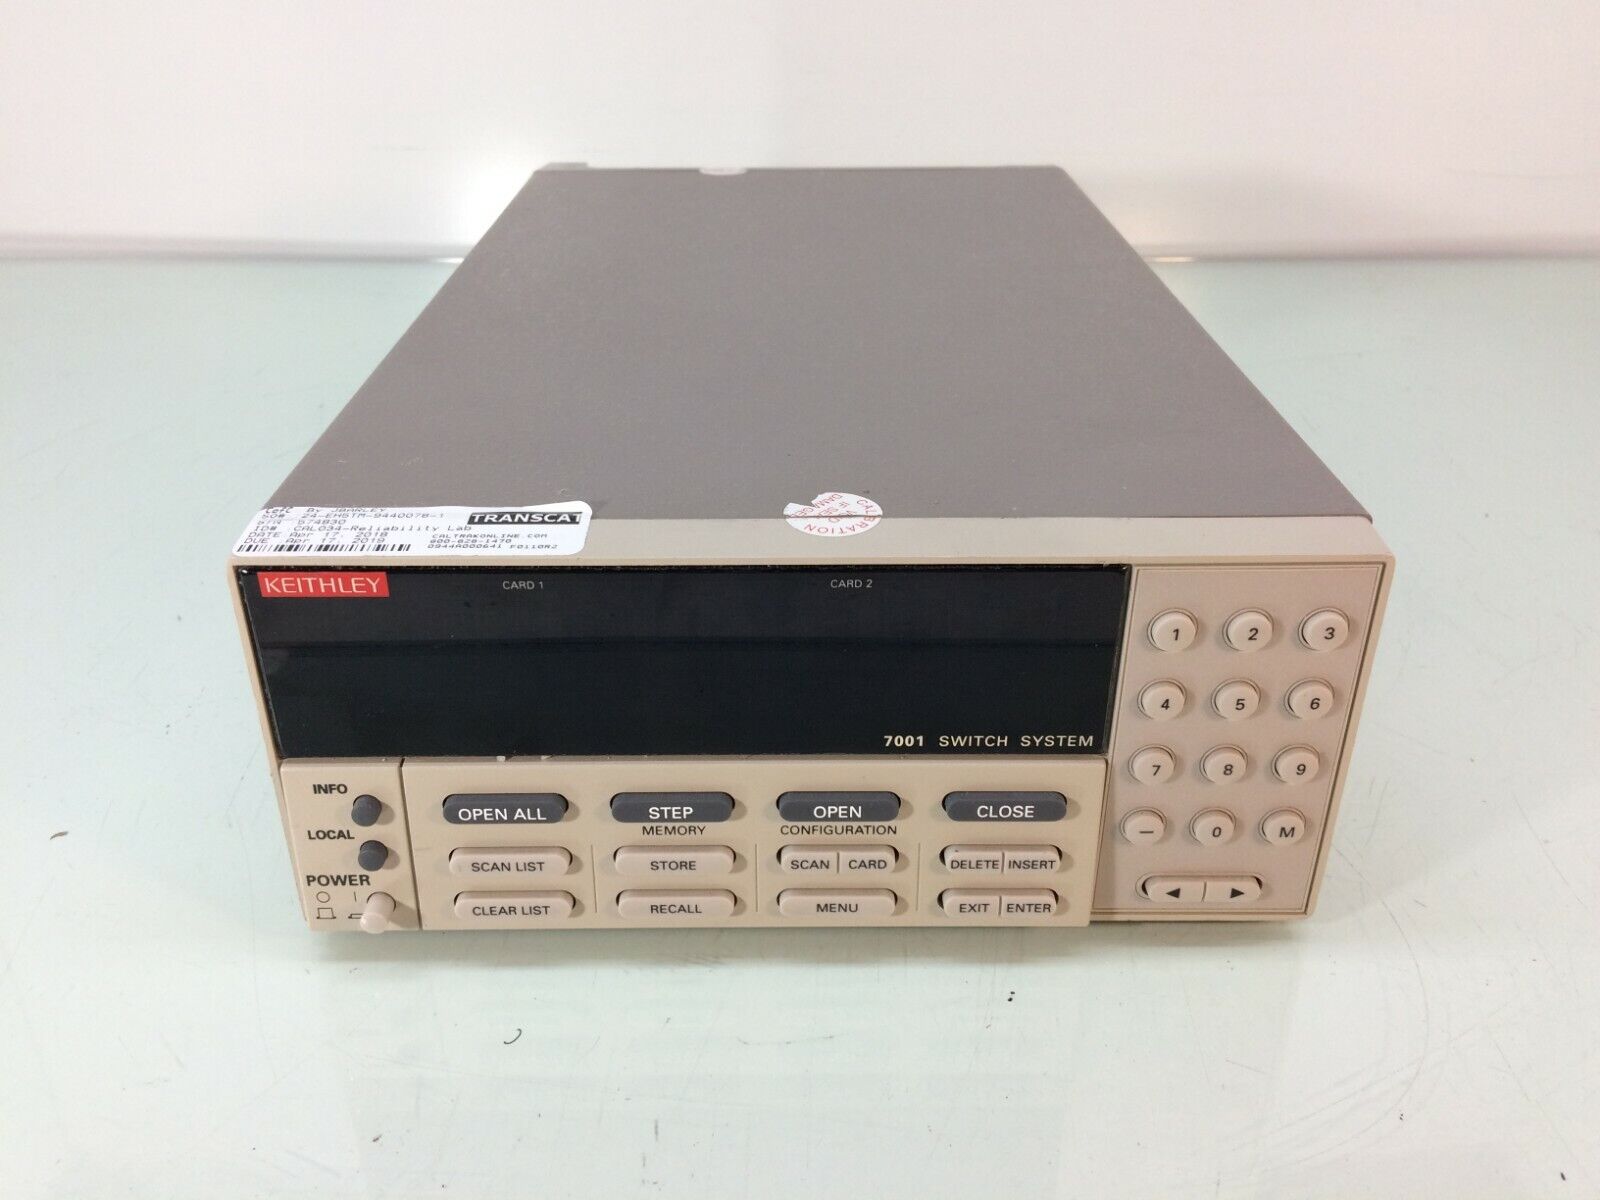 Keithley 7001 80-Channel Switch/Control Mainframe